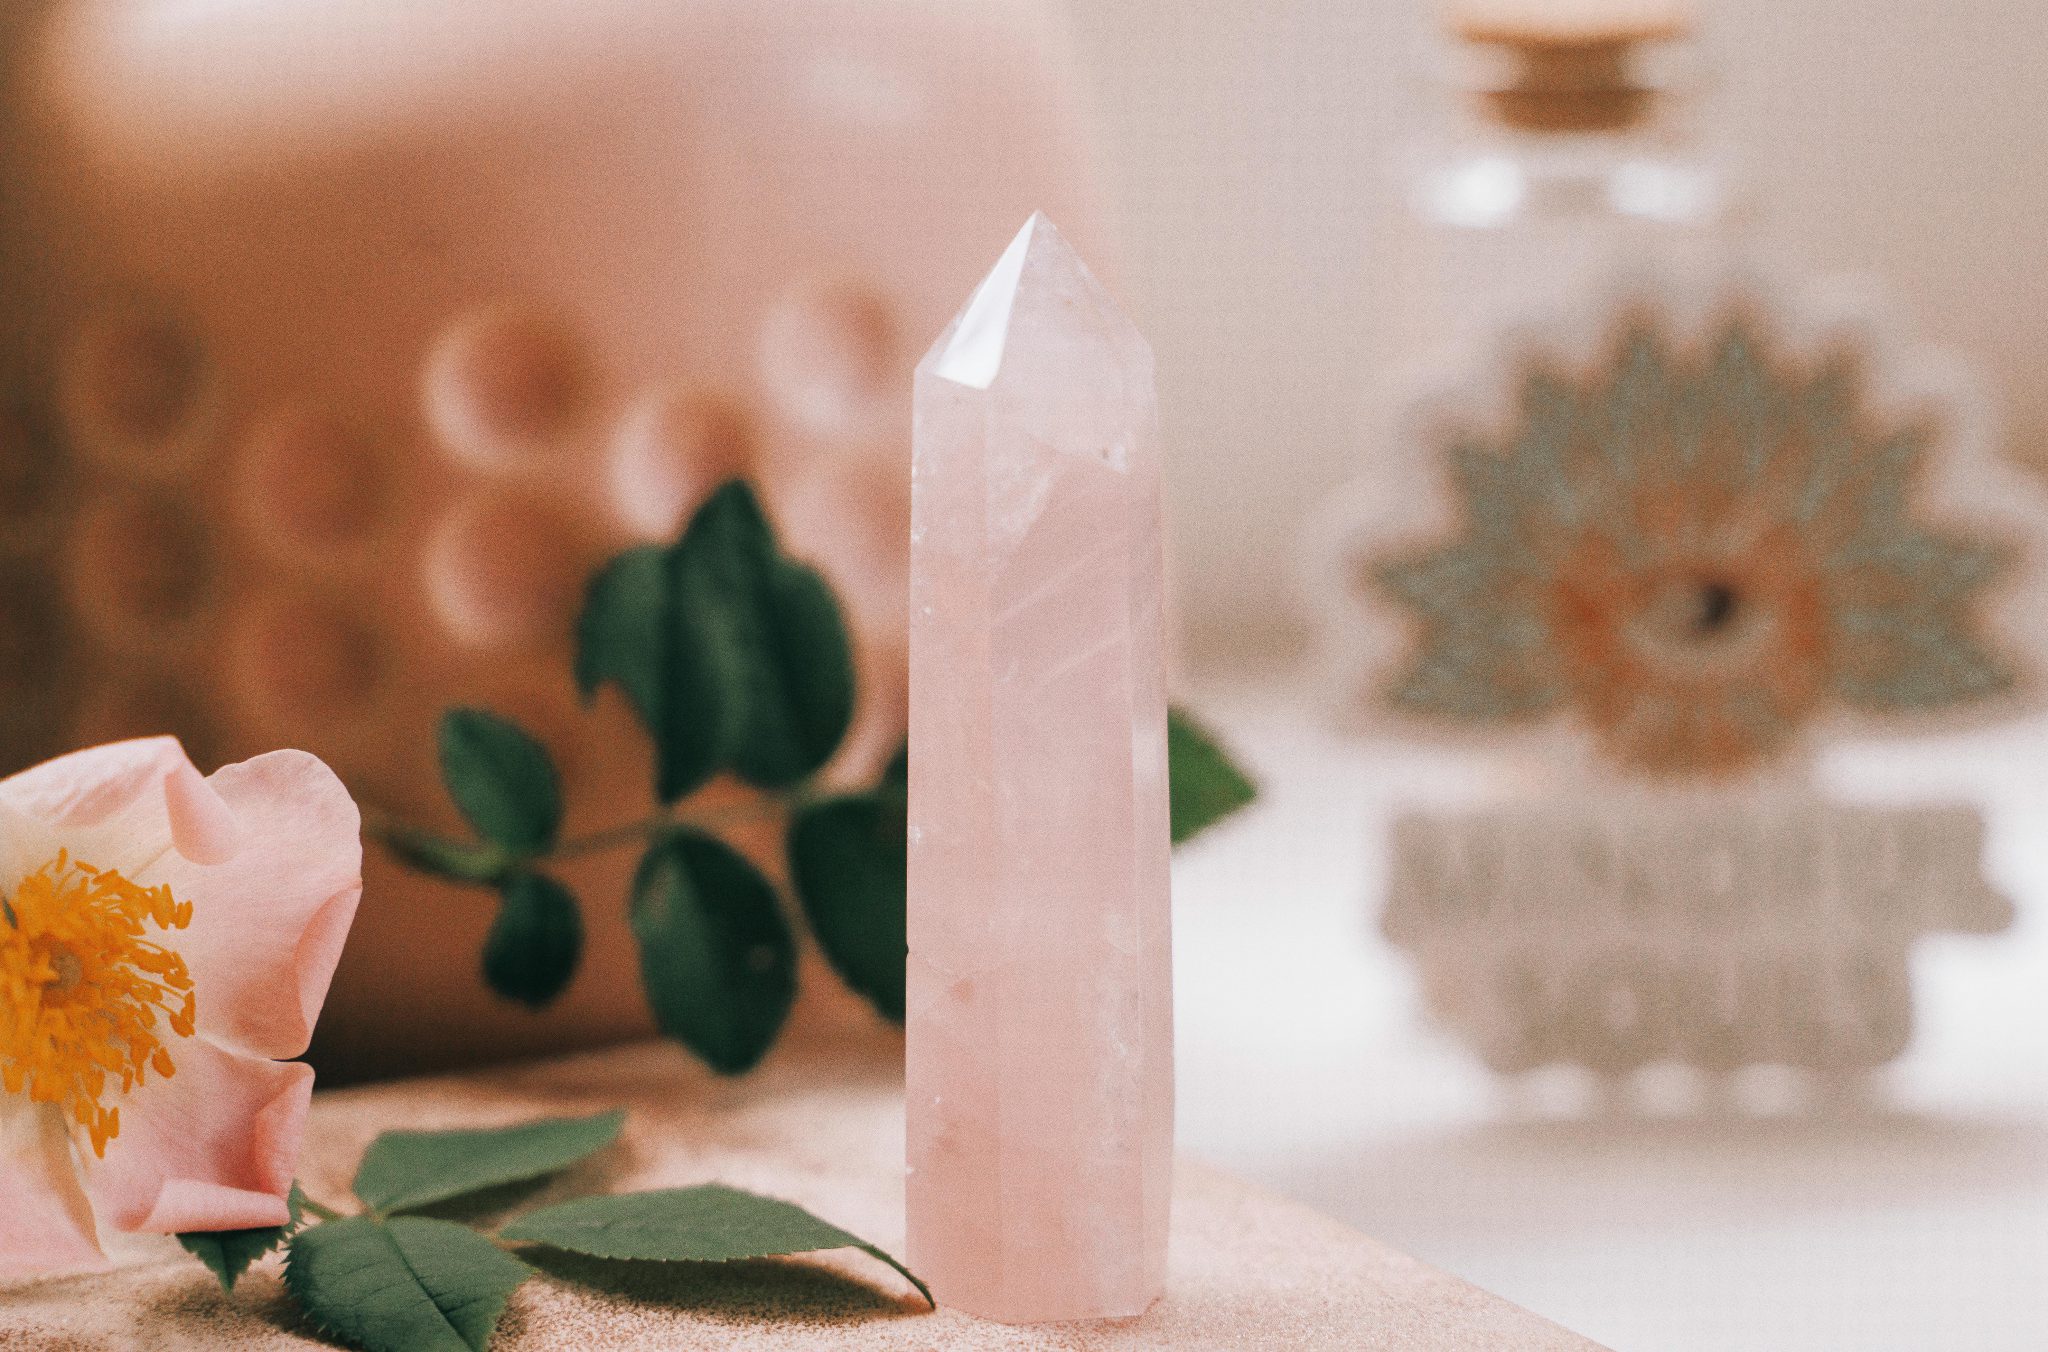 the gemstone of rose quartz, with its pink coloring and ability to attract love and heal emotional trauma